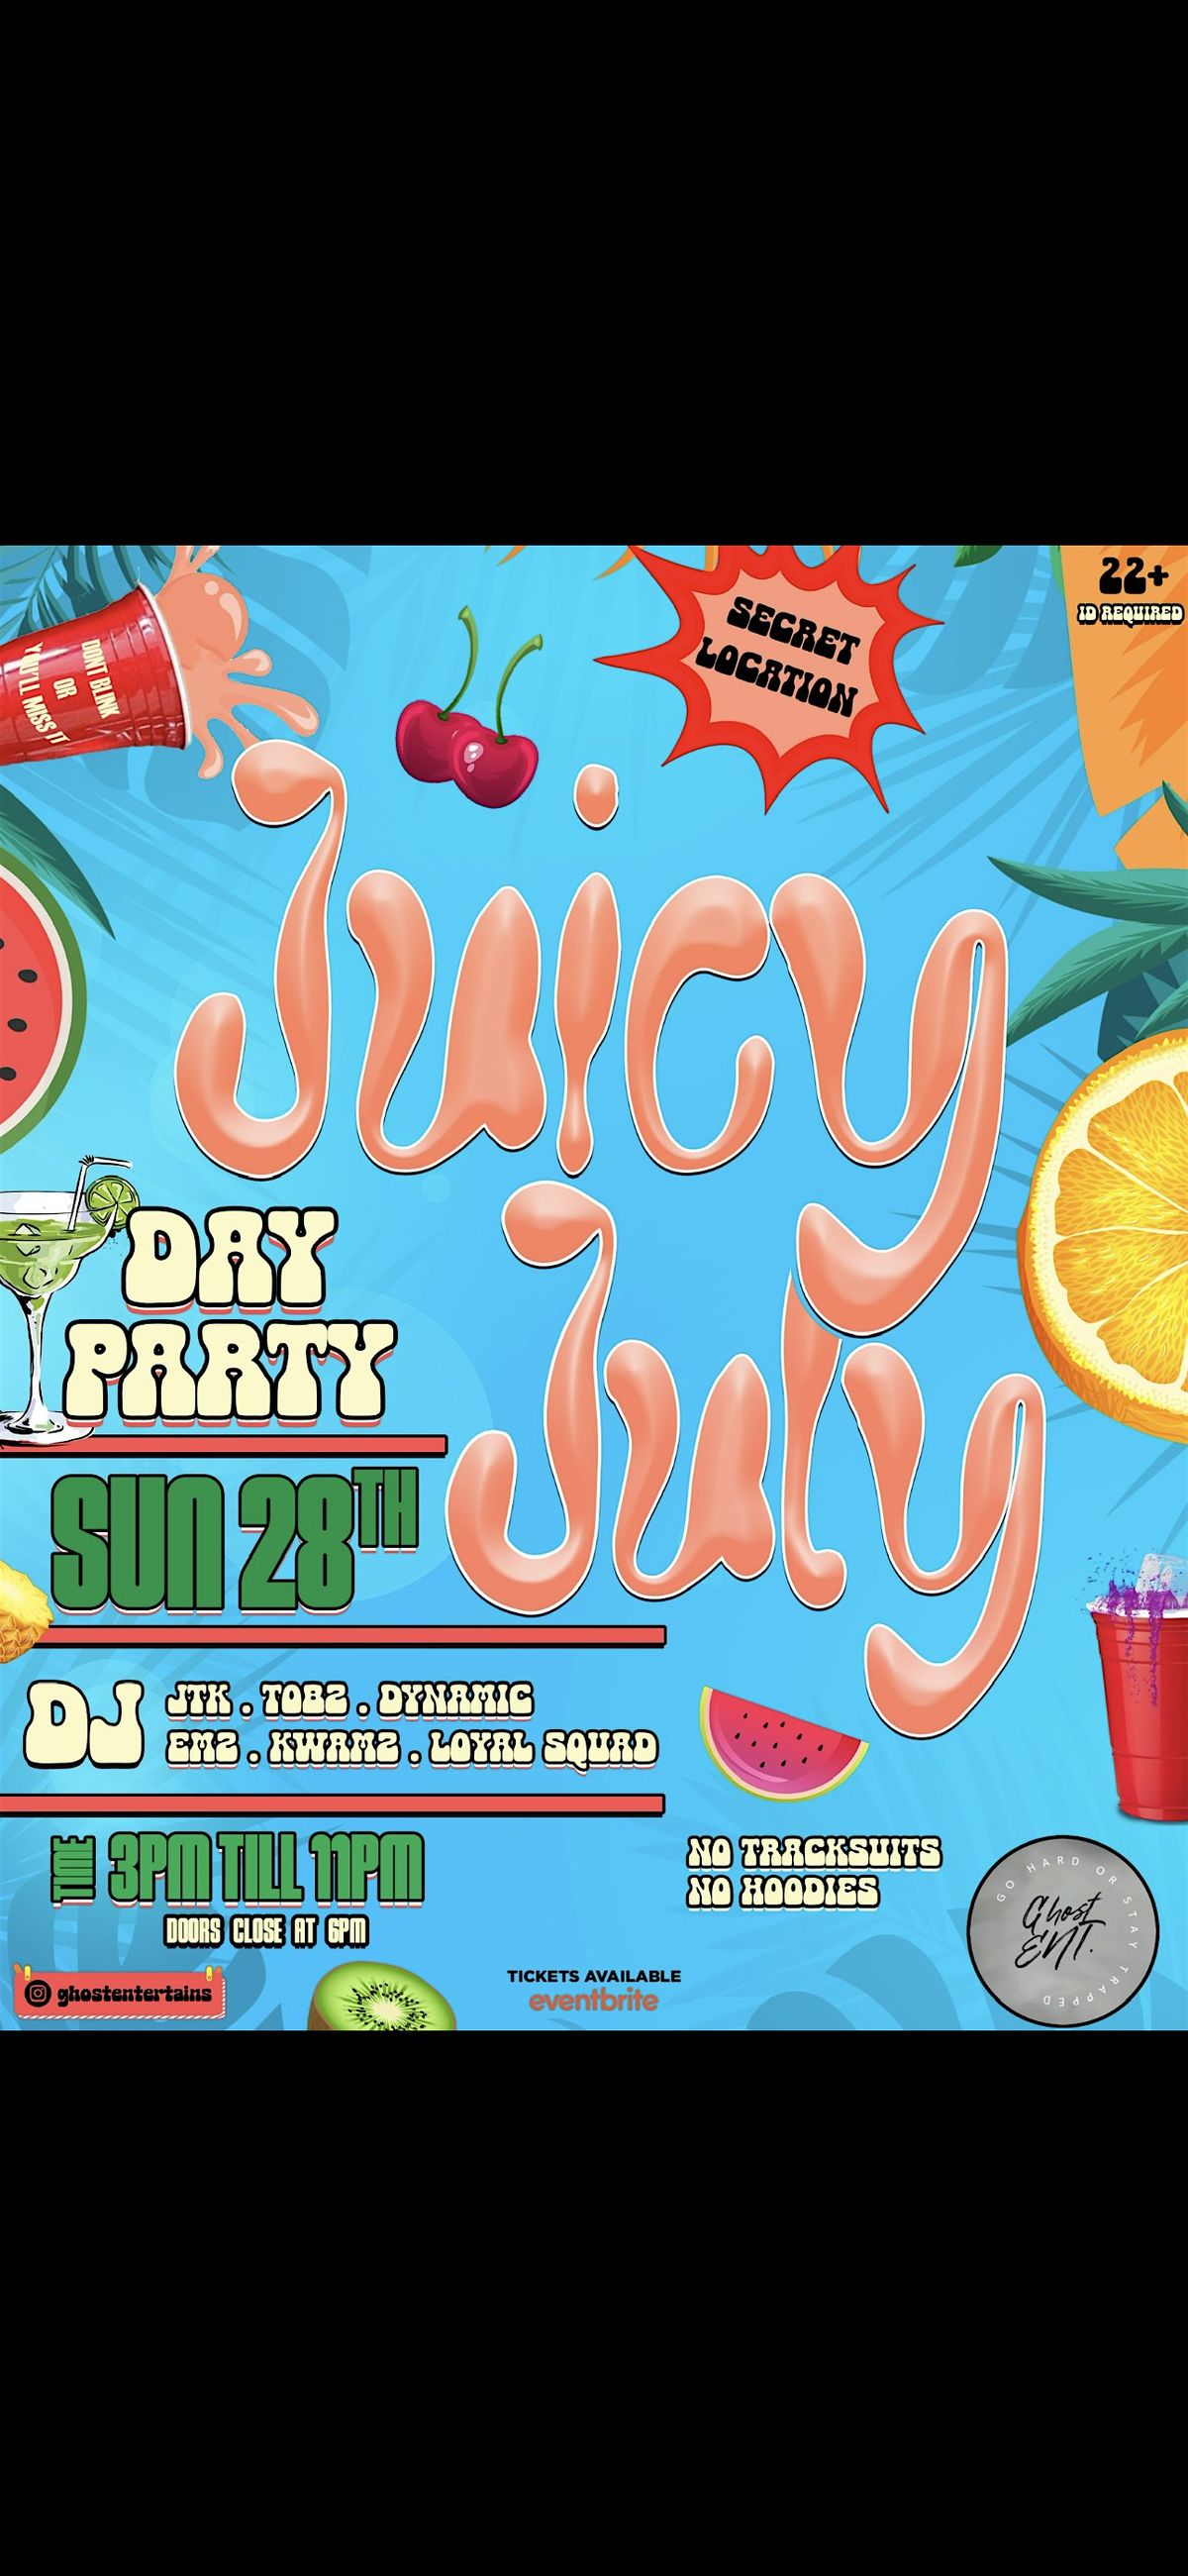 GHOST ENT presents JUICY JULY